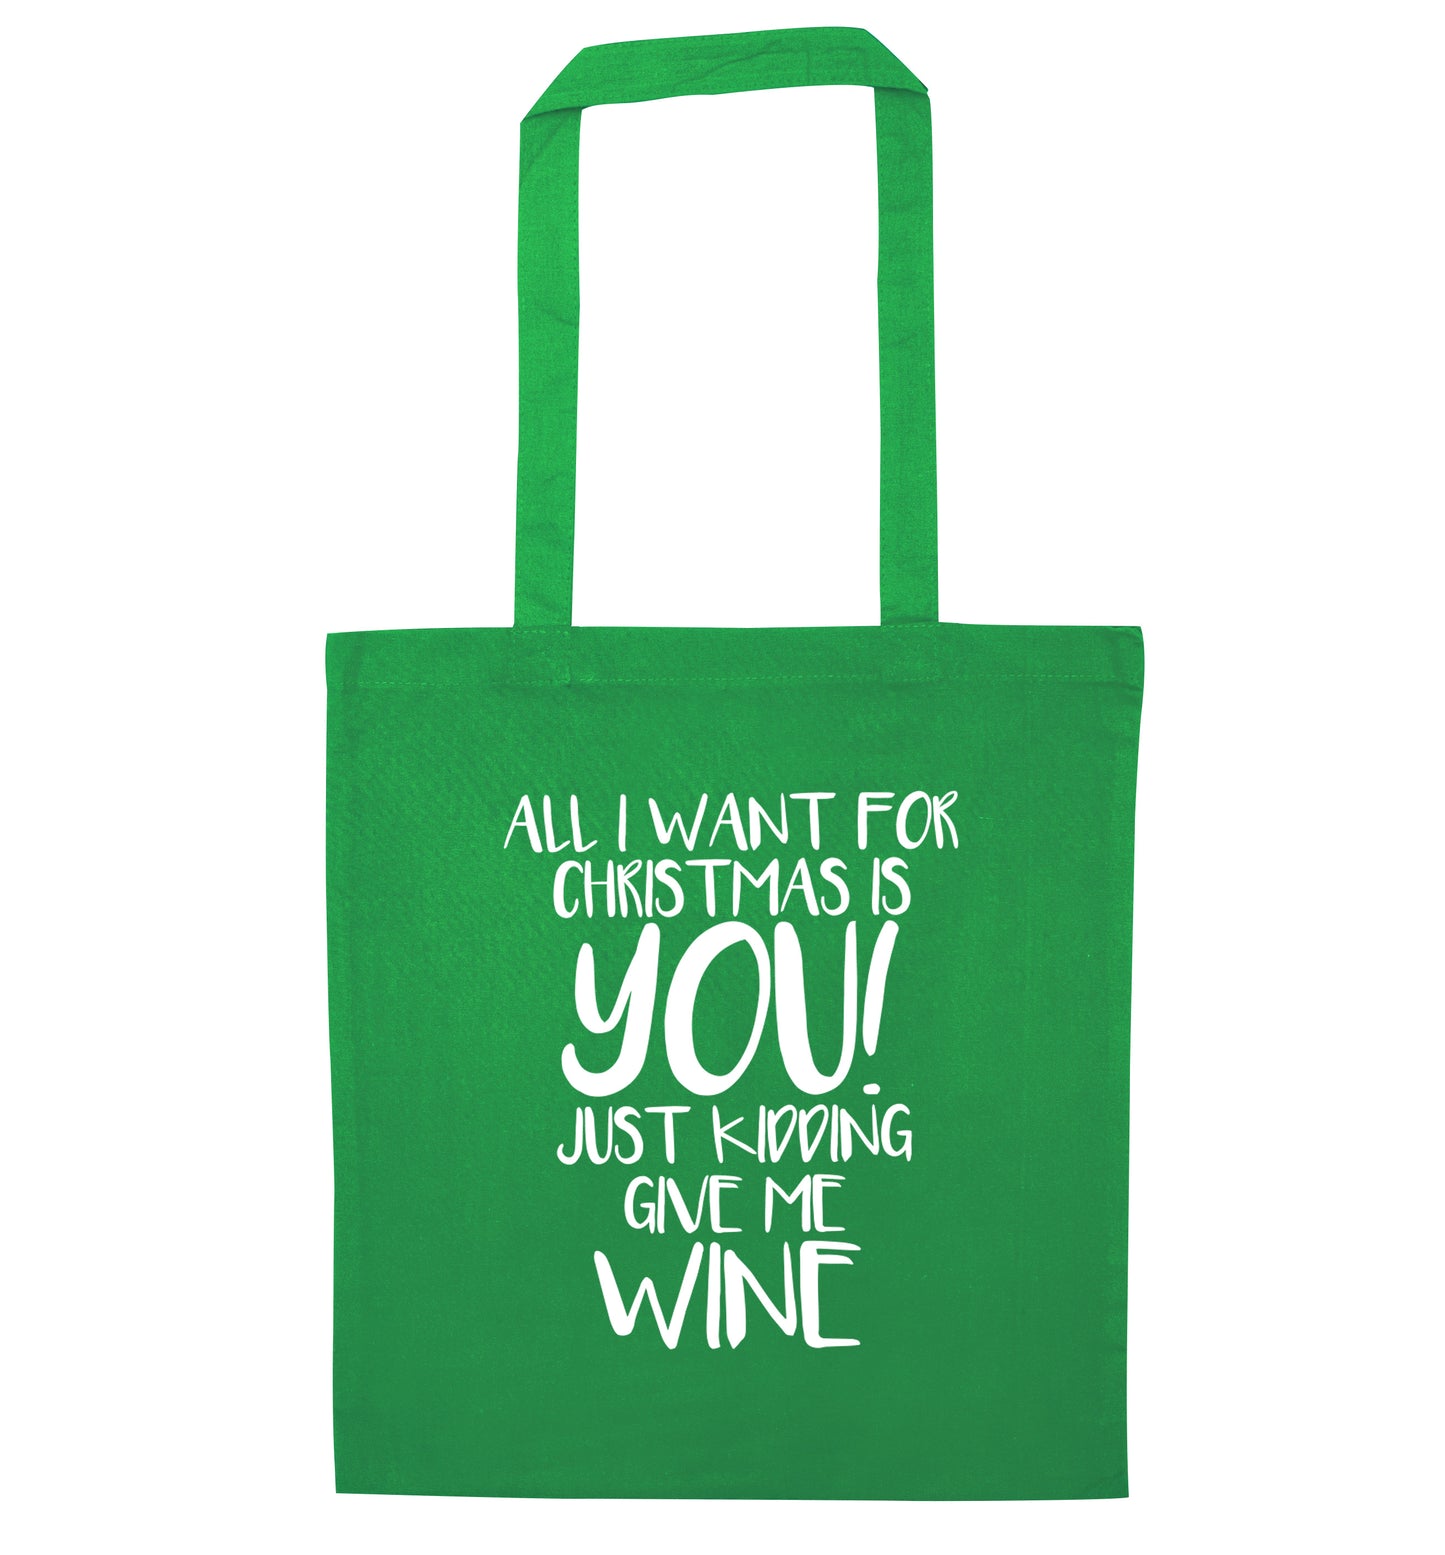 All I want for christmas is you just kidding give me the wine green tote bag